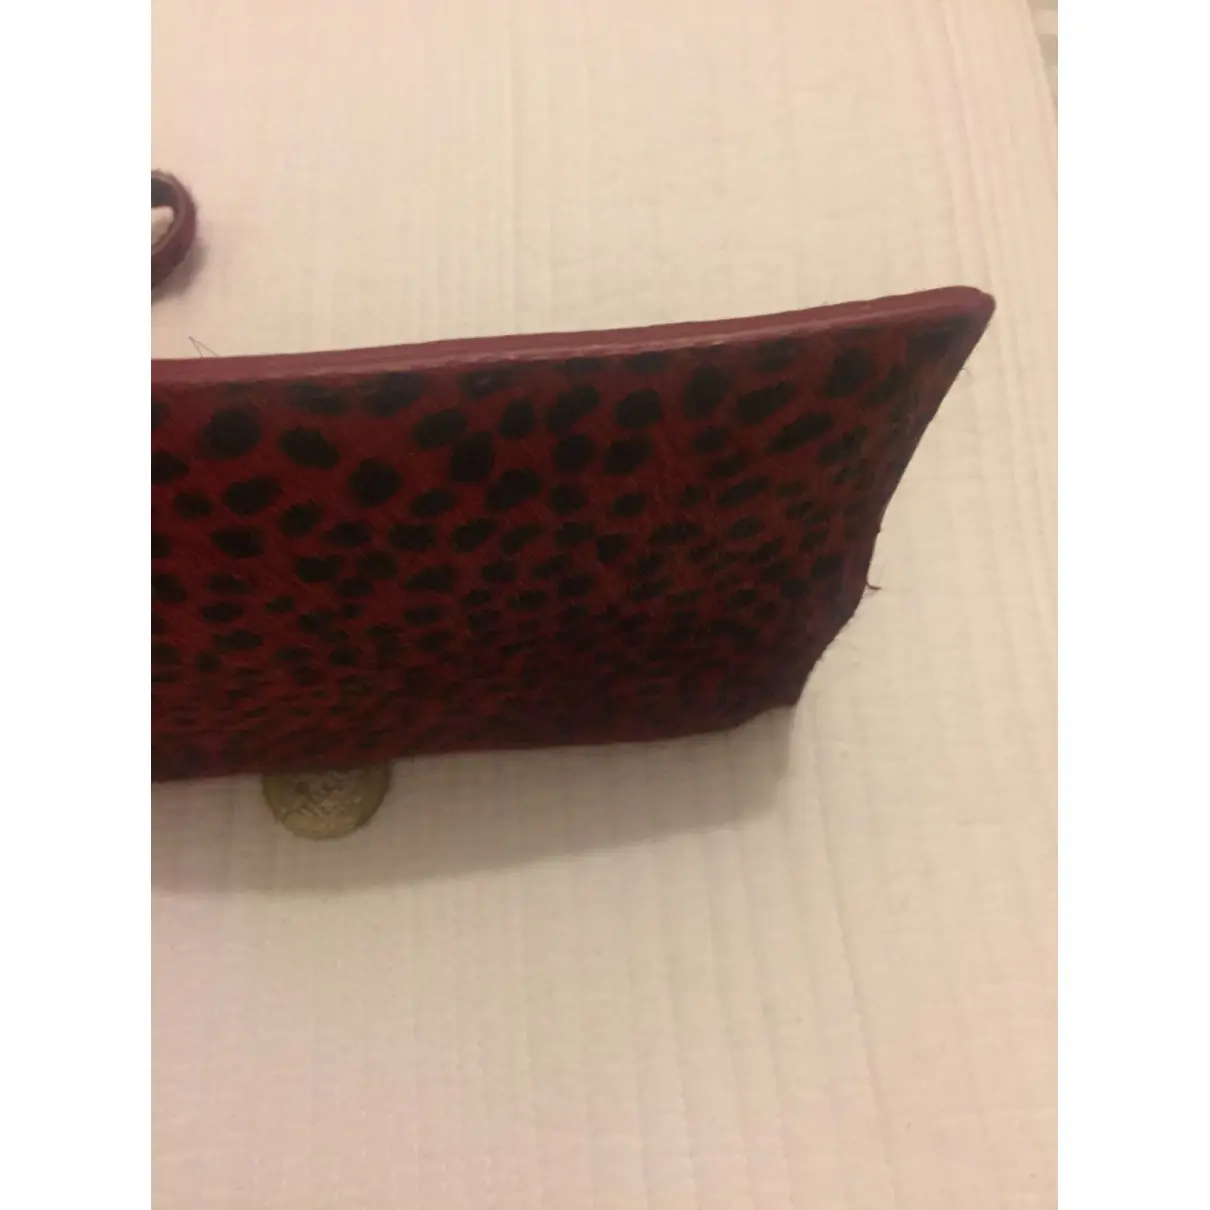 Pony-style calfskin clutch bag French Connection